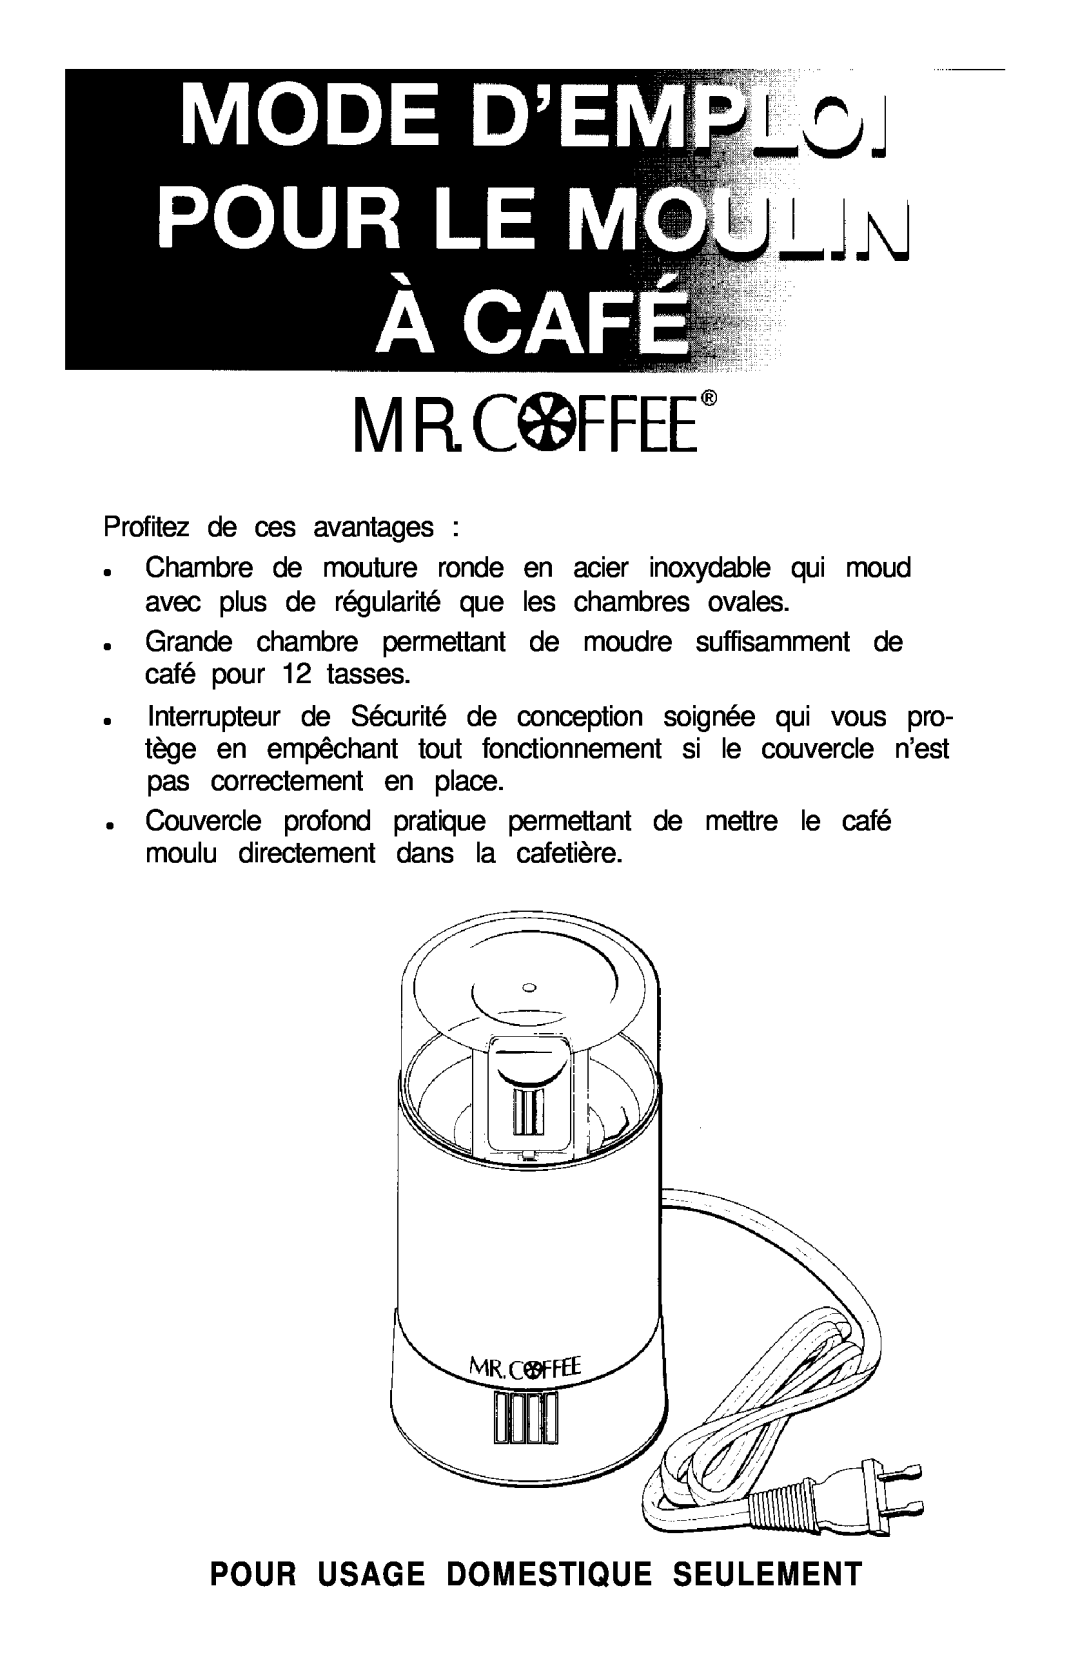 Mr. Coffee COFFEE MILL manual Mr. C@Ffee”, Pour Usage Domestique Seulement 